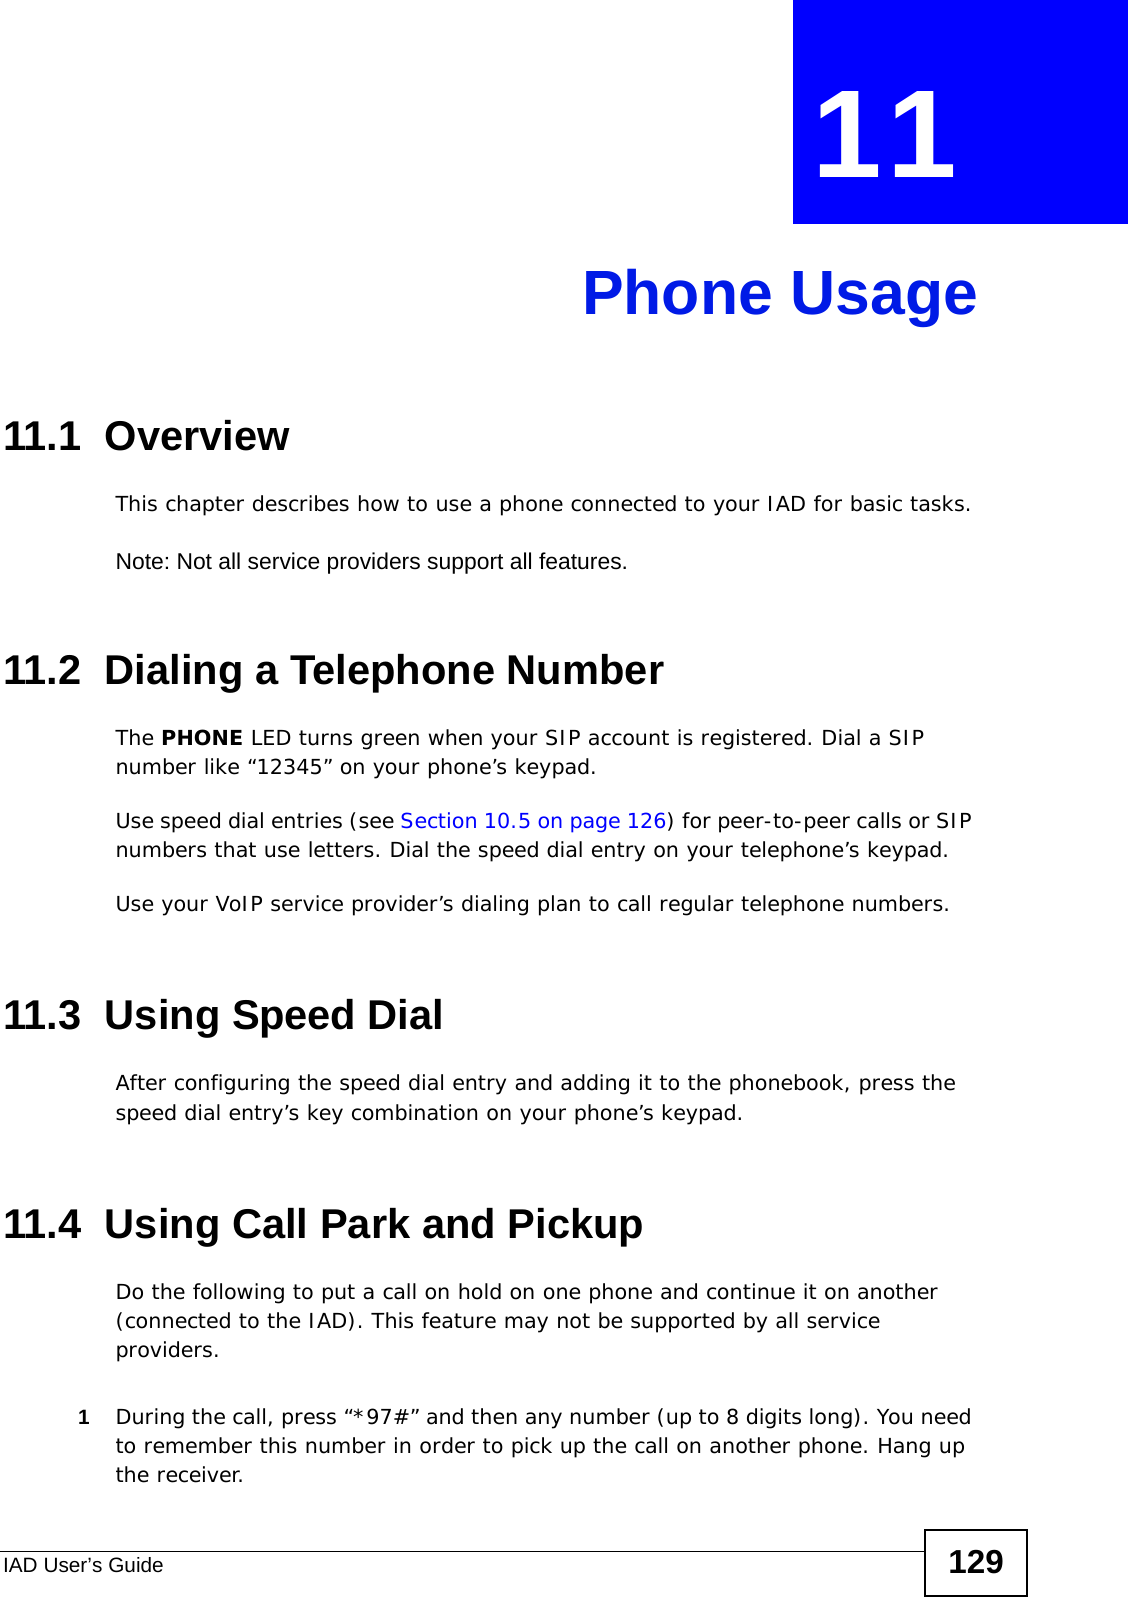 IAD User’s Guide 129CHAPTER  11 Phone Usage11.1  OverviewThis chapter describes how to use a phone connected to your IAD for basic tasks.Note: Not all service providers support all features.11.2  Dialing a Telephone NumberThe PHONE LED turns green when your SIP account is registered. Dial a SIP number like “12345” on your phone’s keypad. Use speed dial entries (see Section 10.5 on page 126) for peer-to-peer calls or SIP numbers that use letters. Dial the speed dial entry on your telephone’s keypad. Use your VoIP service provider’s dialing plan to call regular telephone numbers.11.3  Using Speed DialAfter configuring the speed dial entry and adding it to the phonebook, press the speed dial entry’s key combination on your phone’s keypad.11.4  Using Call Park and PickupDo the following to put a call on hold on one phone and continue it on another (connected to the IAD). This feature may not be supported by all service providers. 1During the call, press “*97#” and then any number (up to 8 digits long). You need to remember this number in order to pick up the call on another phone. Hang up the receiver.